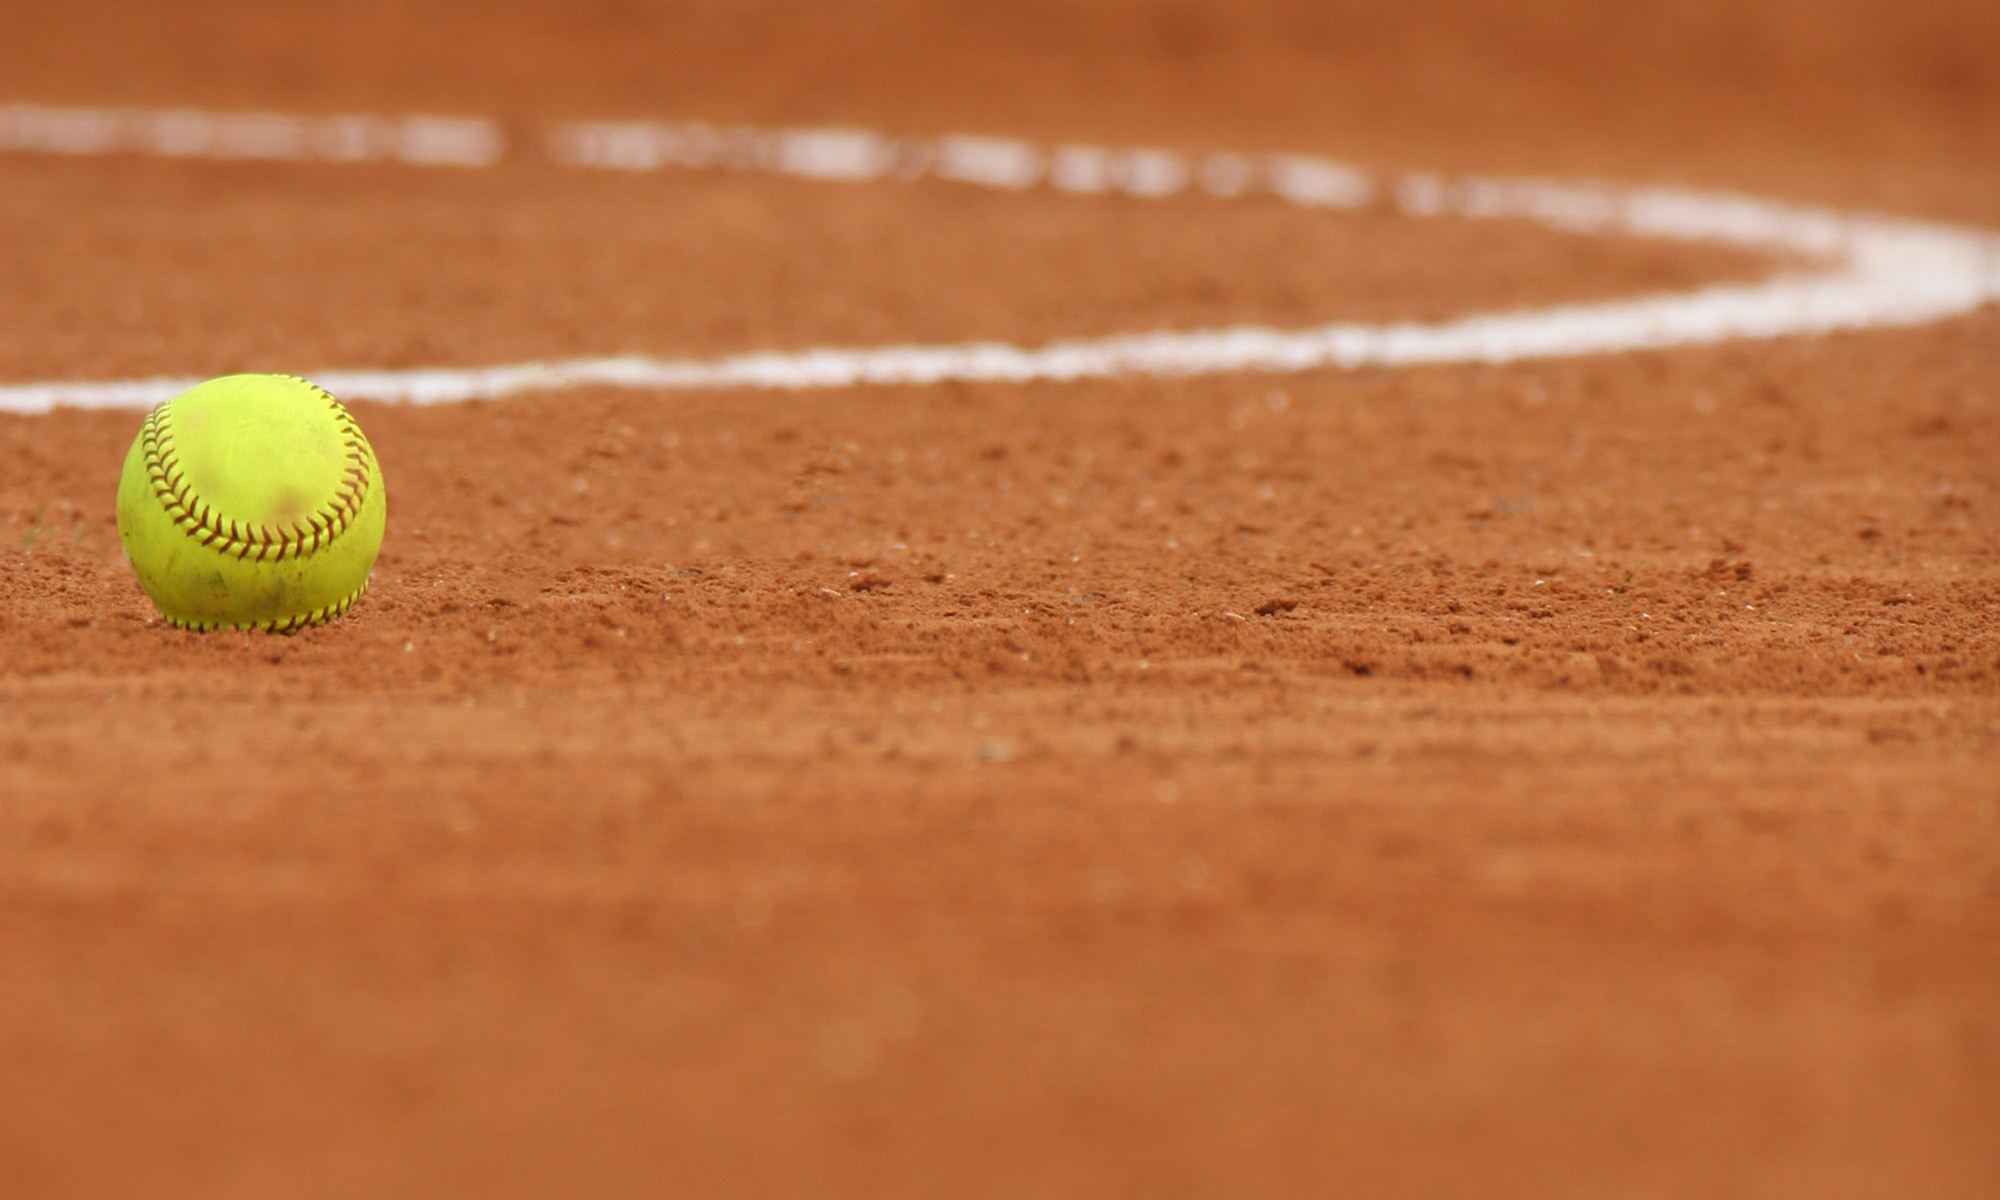 2000x1200 Softball Wallpapers HD - Page 2 of 3 - wallpaper.wiki ...